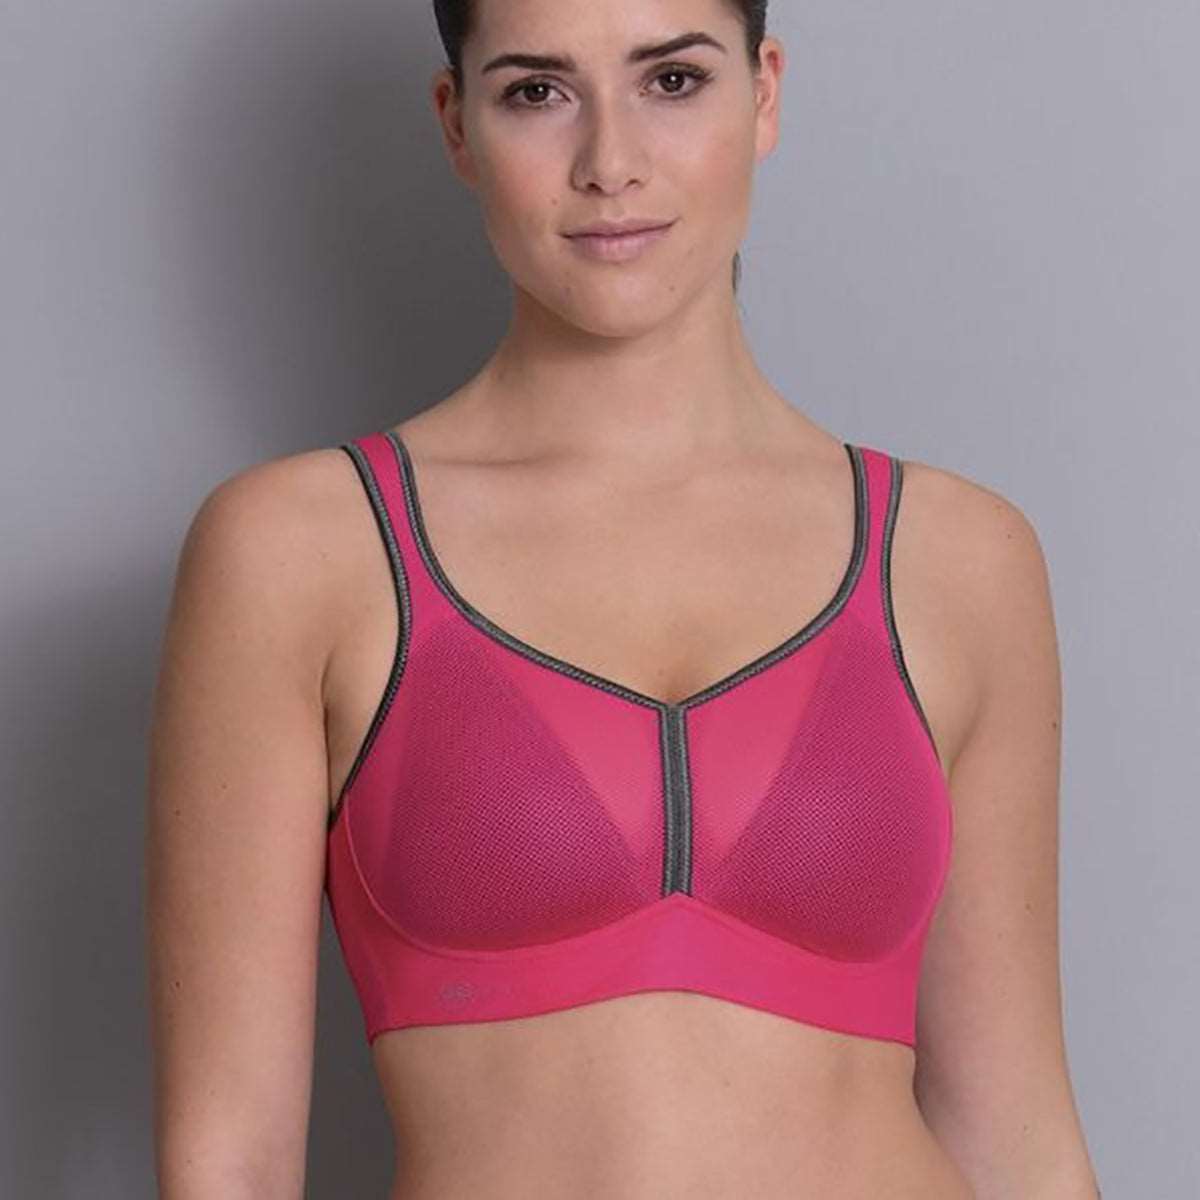 Anita Active 5567-107 Women's Smart Rose Non-Padded Non-Wired Sports Bra 34H  : Anita: : Clothing, Shoes & Accessories